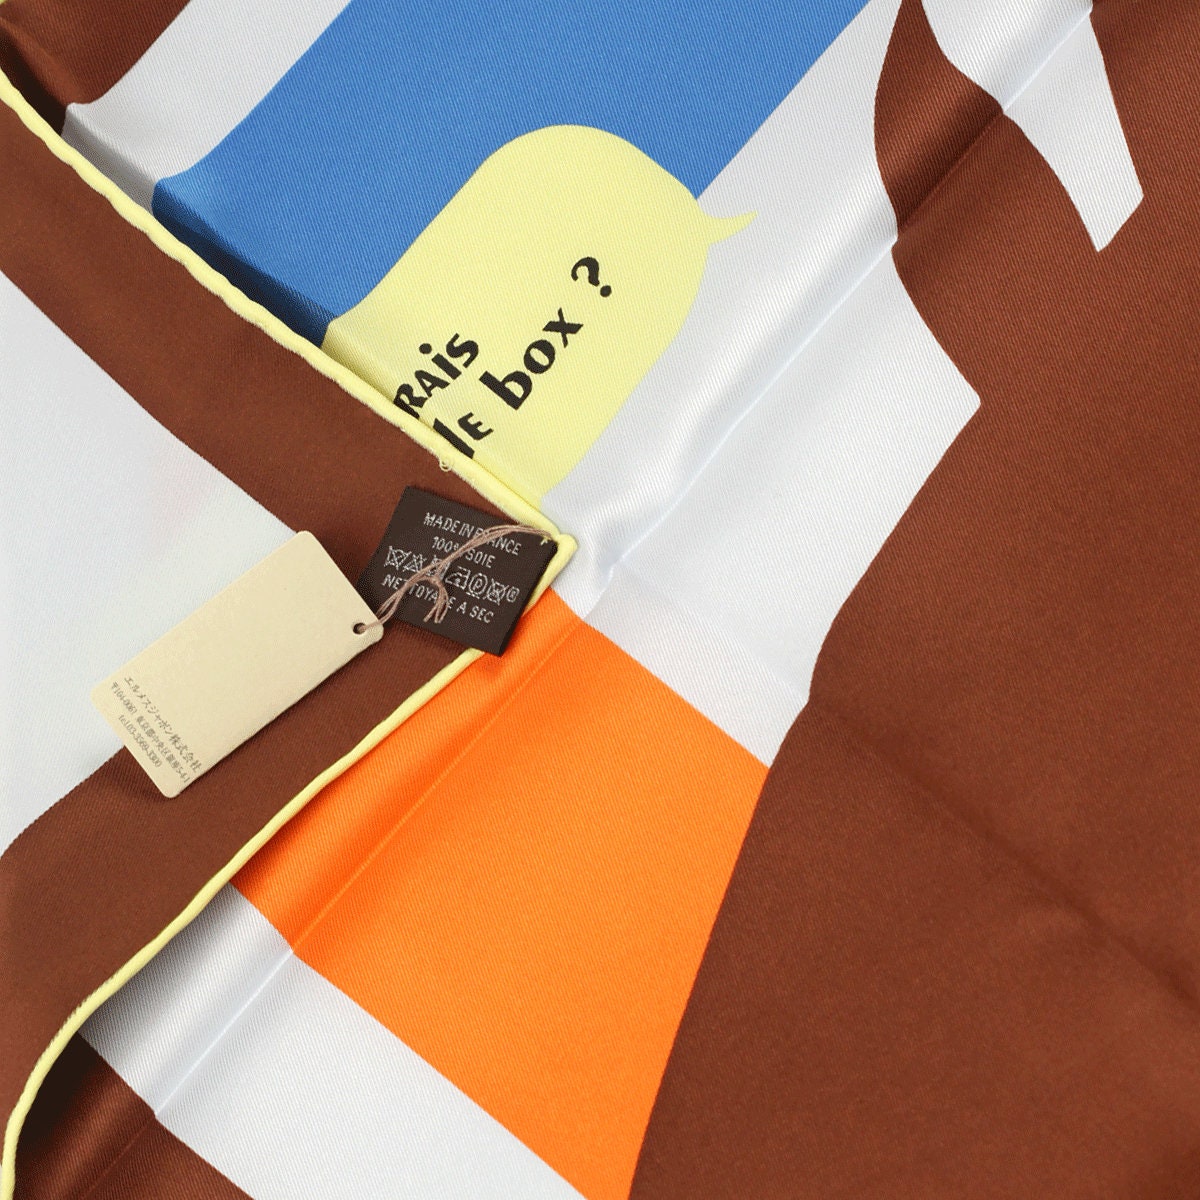 Hermes Scarf "Is This a Love Story?" 70cm Silk | Foulard Carre